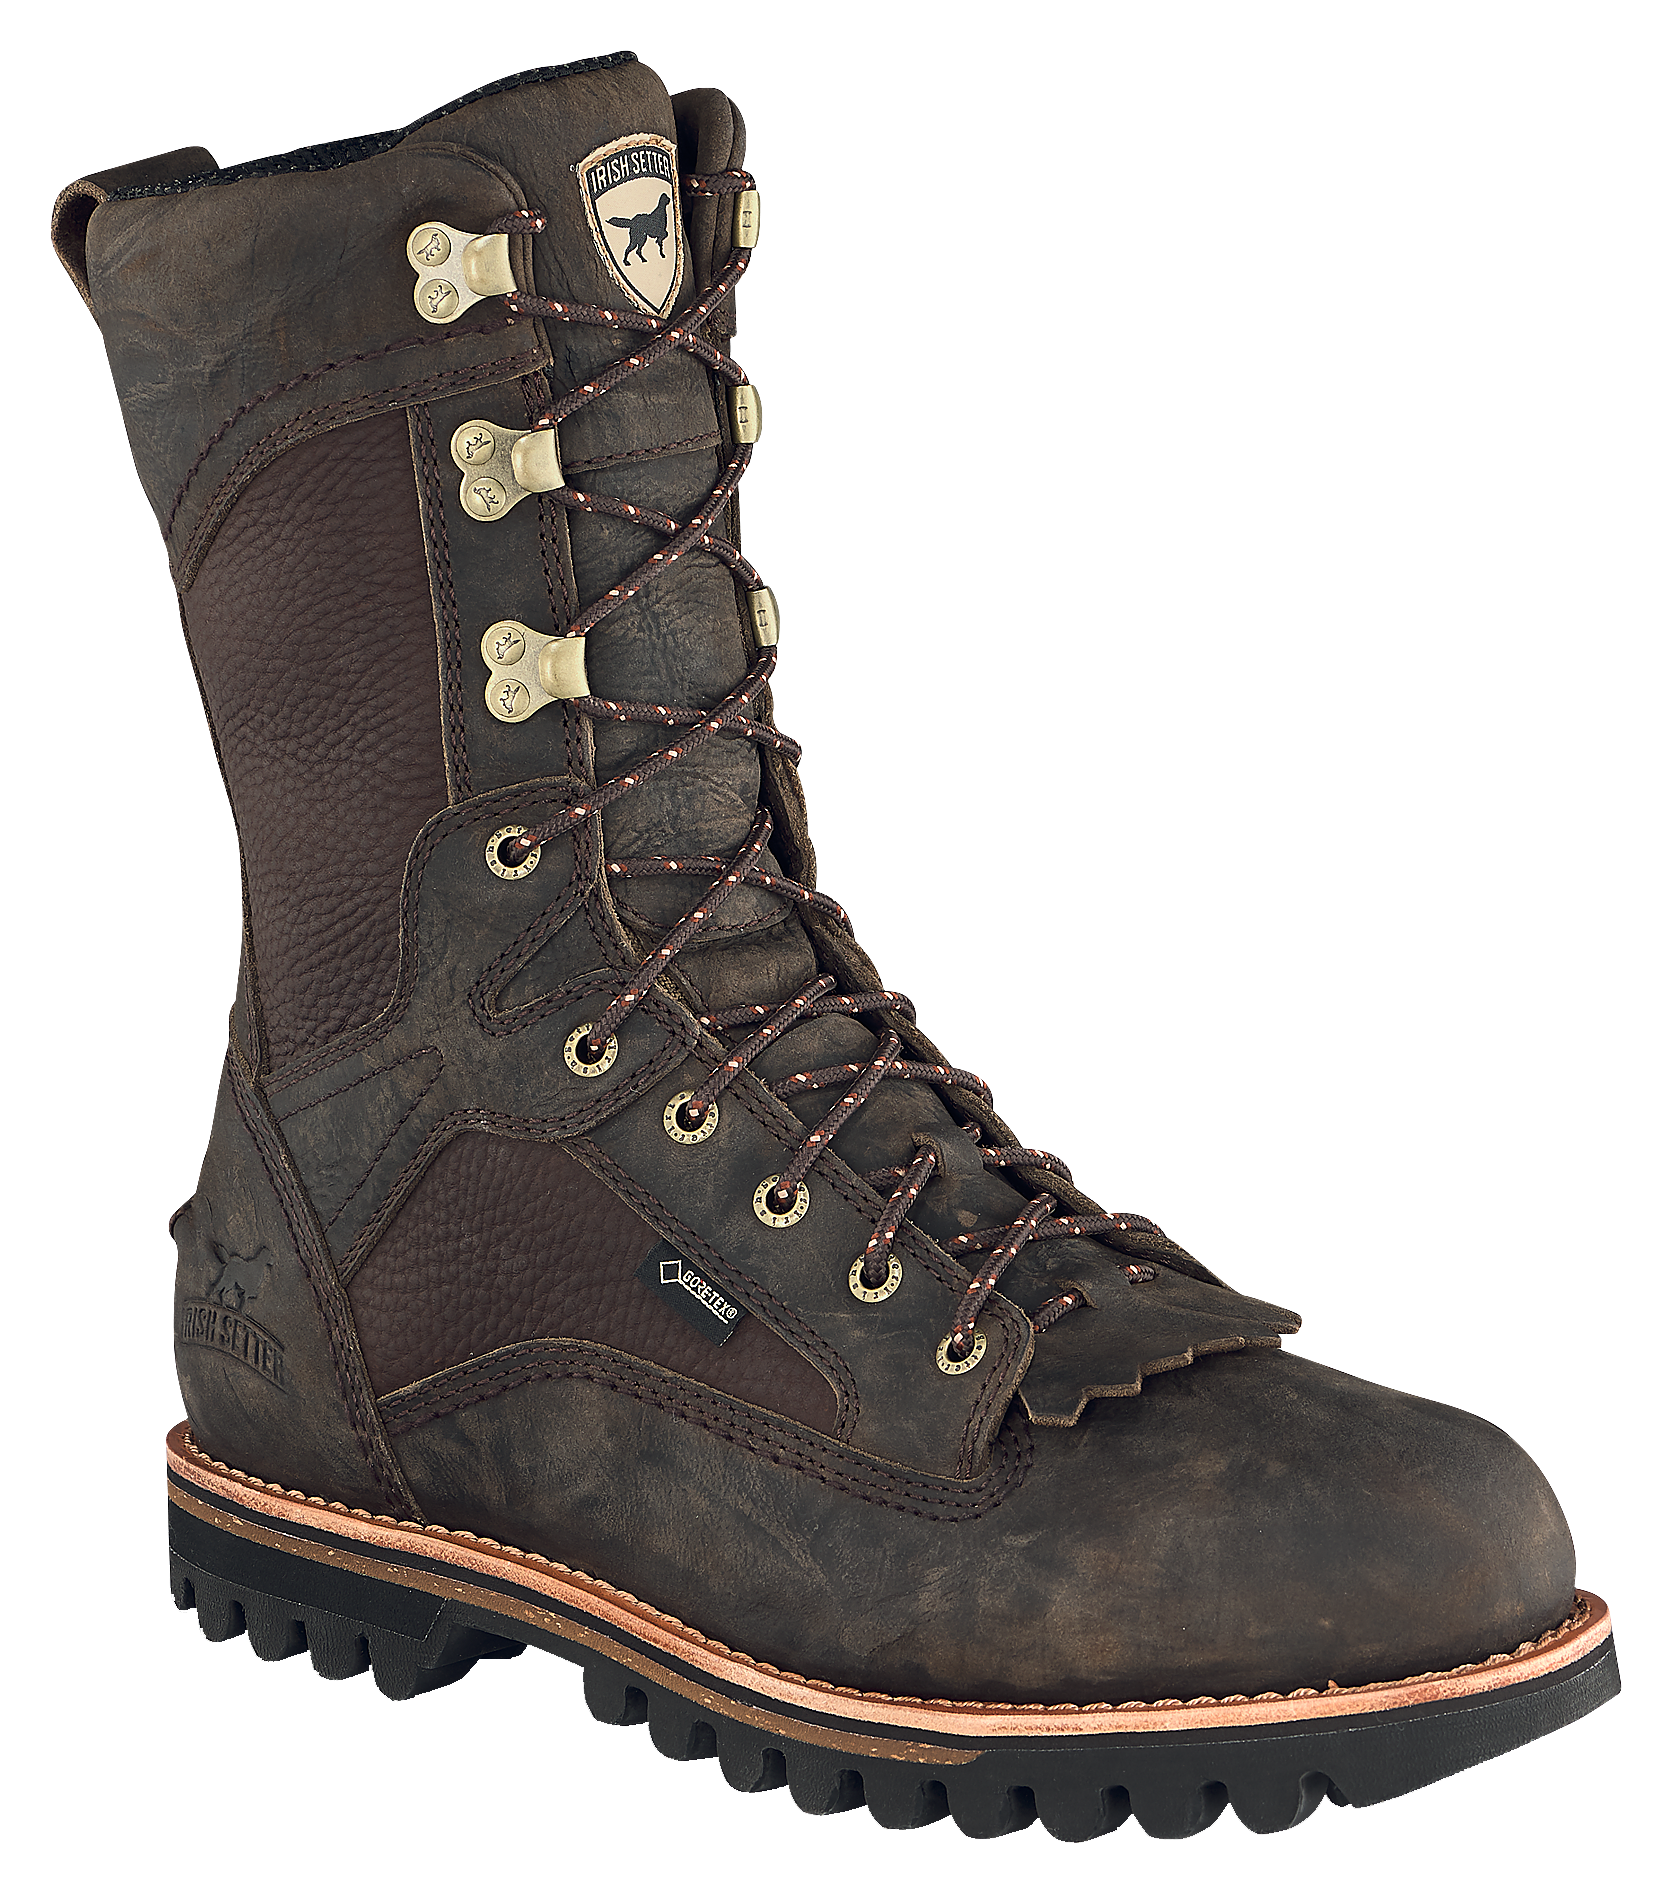 Irish Setter Elk Tracker GORE-TEX Insulated Hunting Boots for Men - Brown - 13M